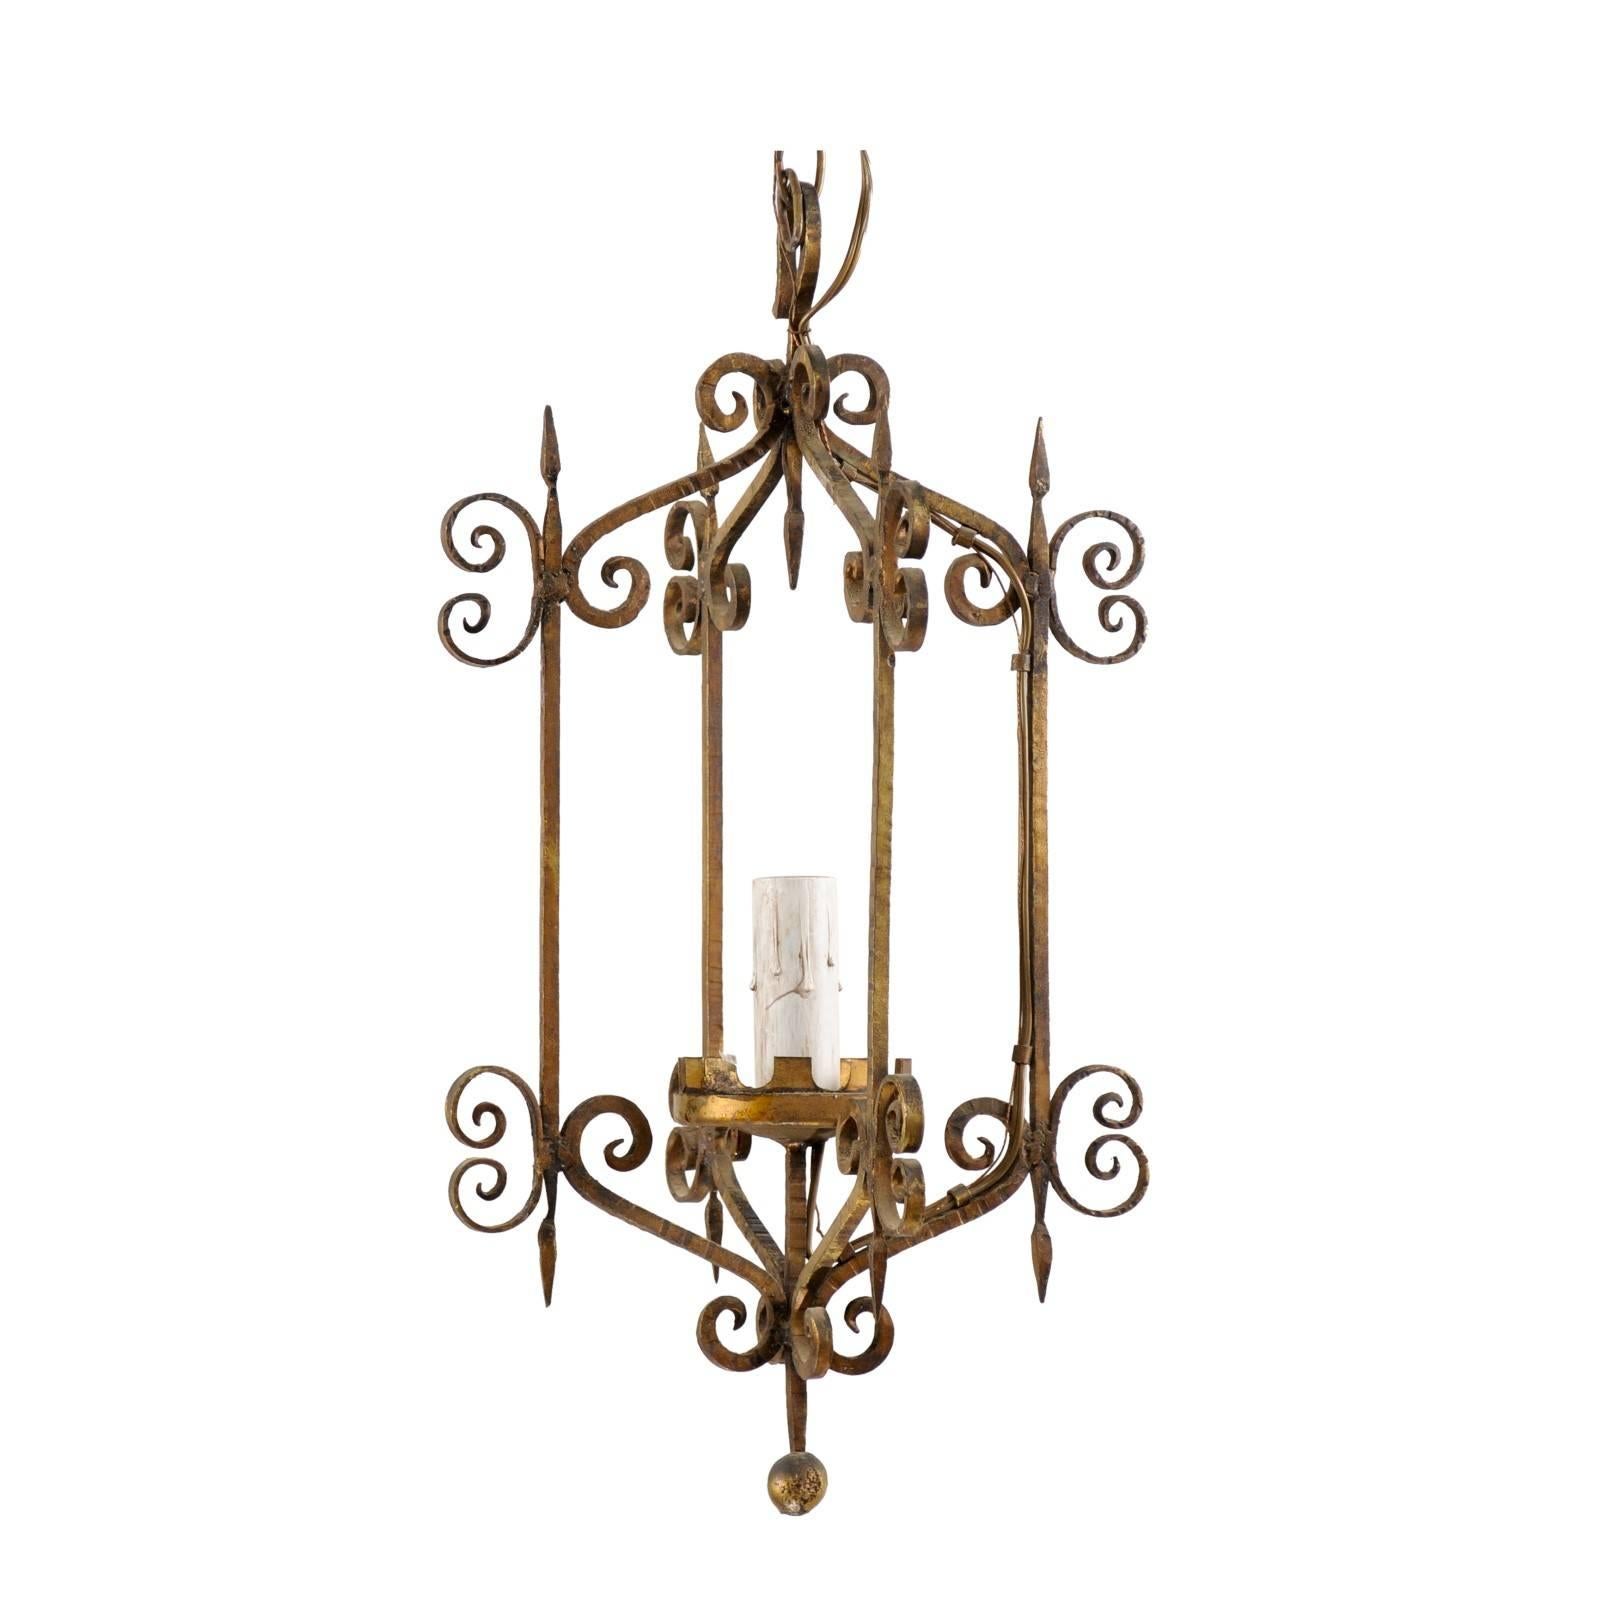 French Mid-20th Century Single Light Scrolled Iron Chandelier in Gold Bronze Hue